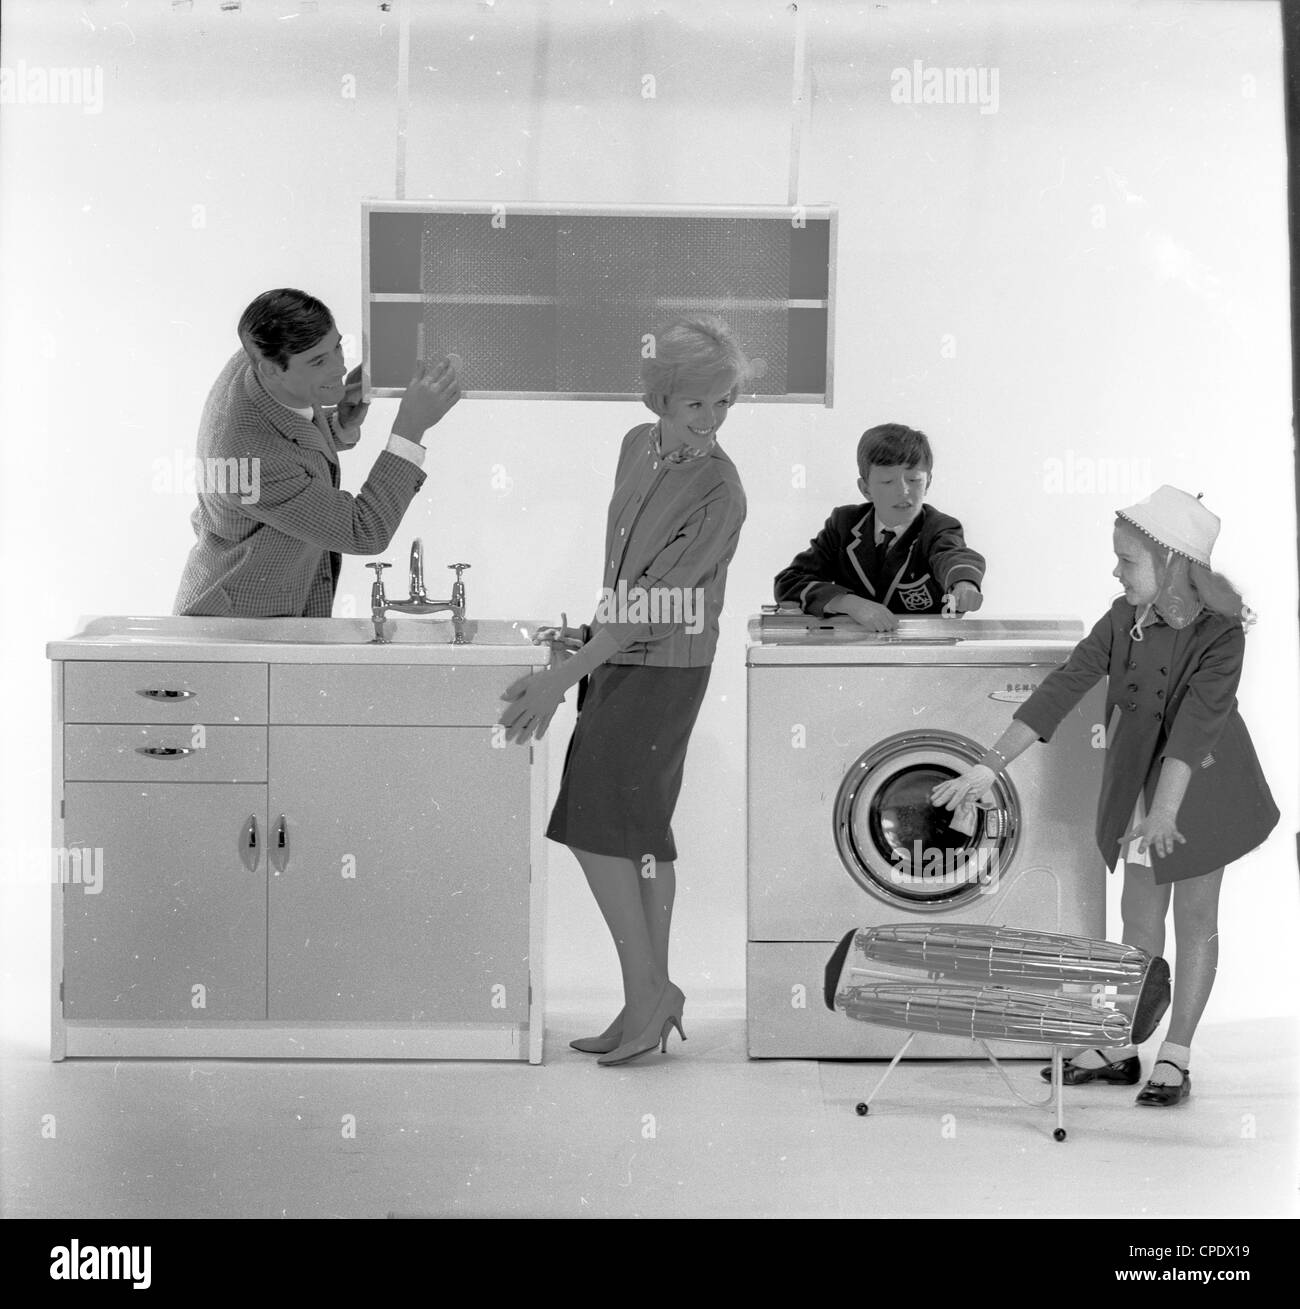 1960s. Photo shoot advertising new kitchen appliances. Mother, father and son and daughter pose in a photographic studio admiring the new  kitchen units and home appliances now available for the modern home. Stock Photo